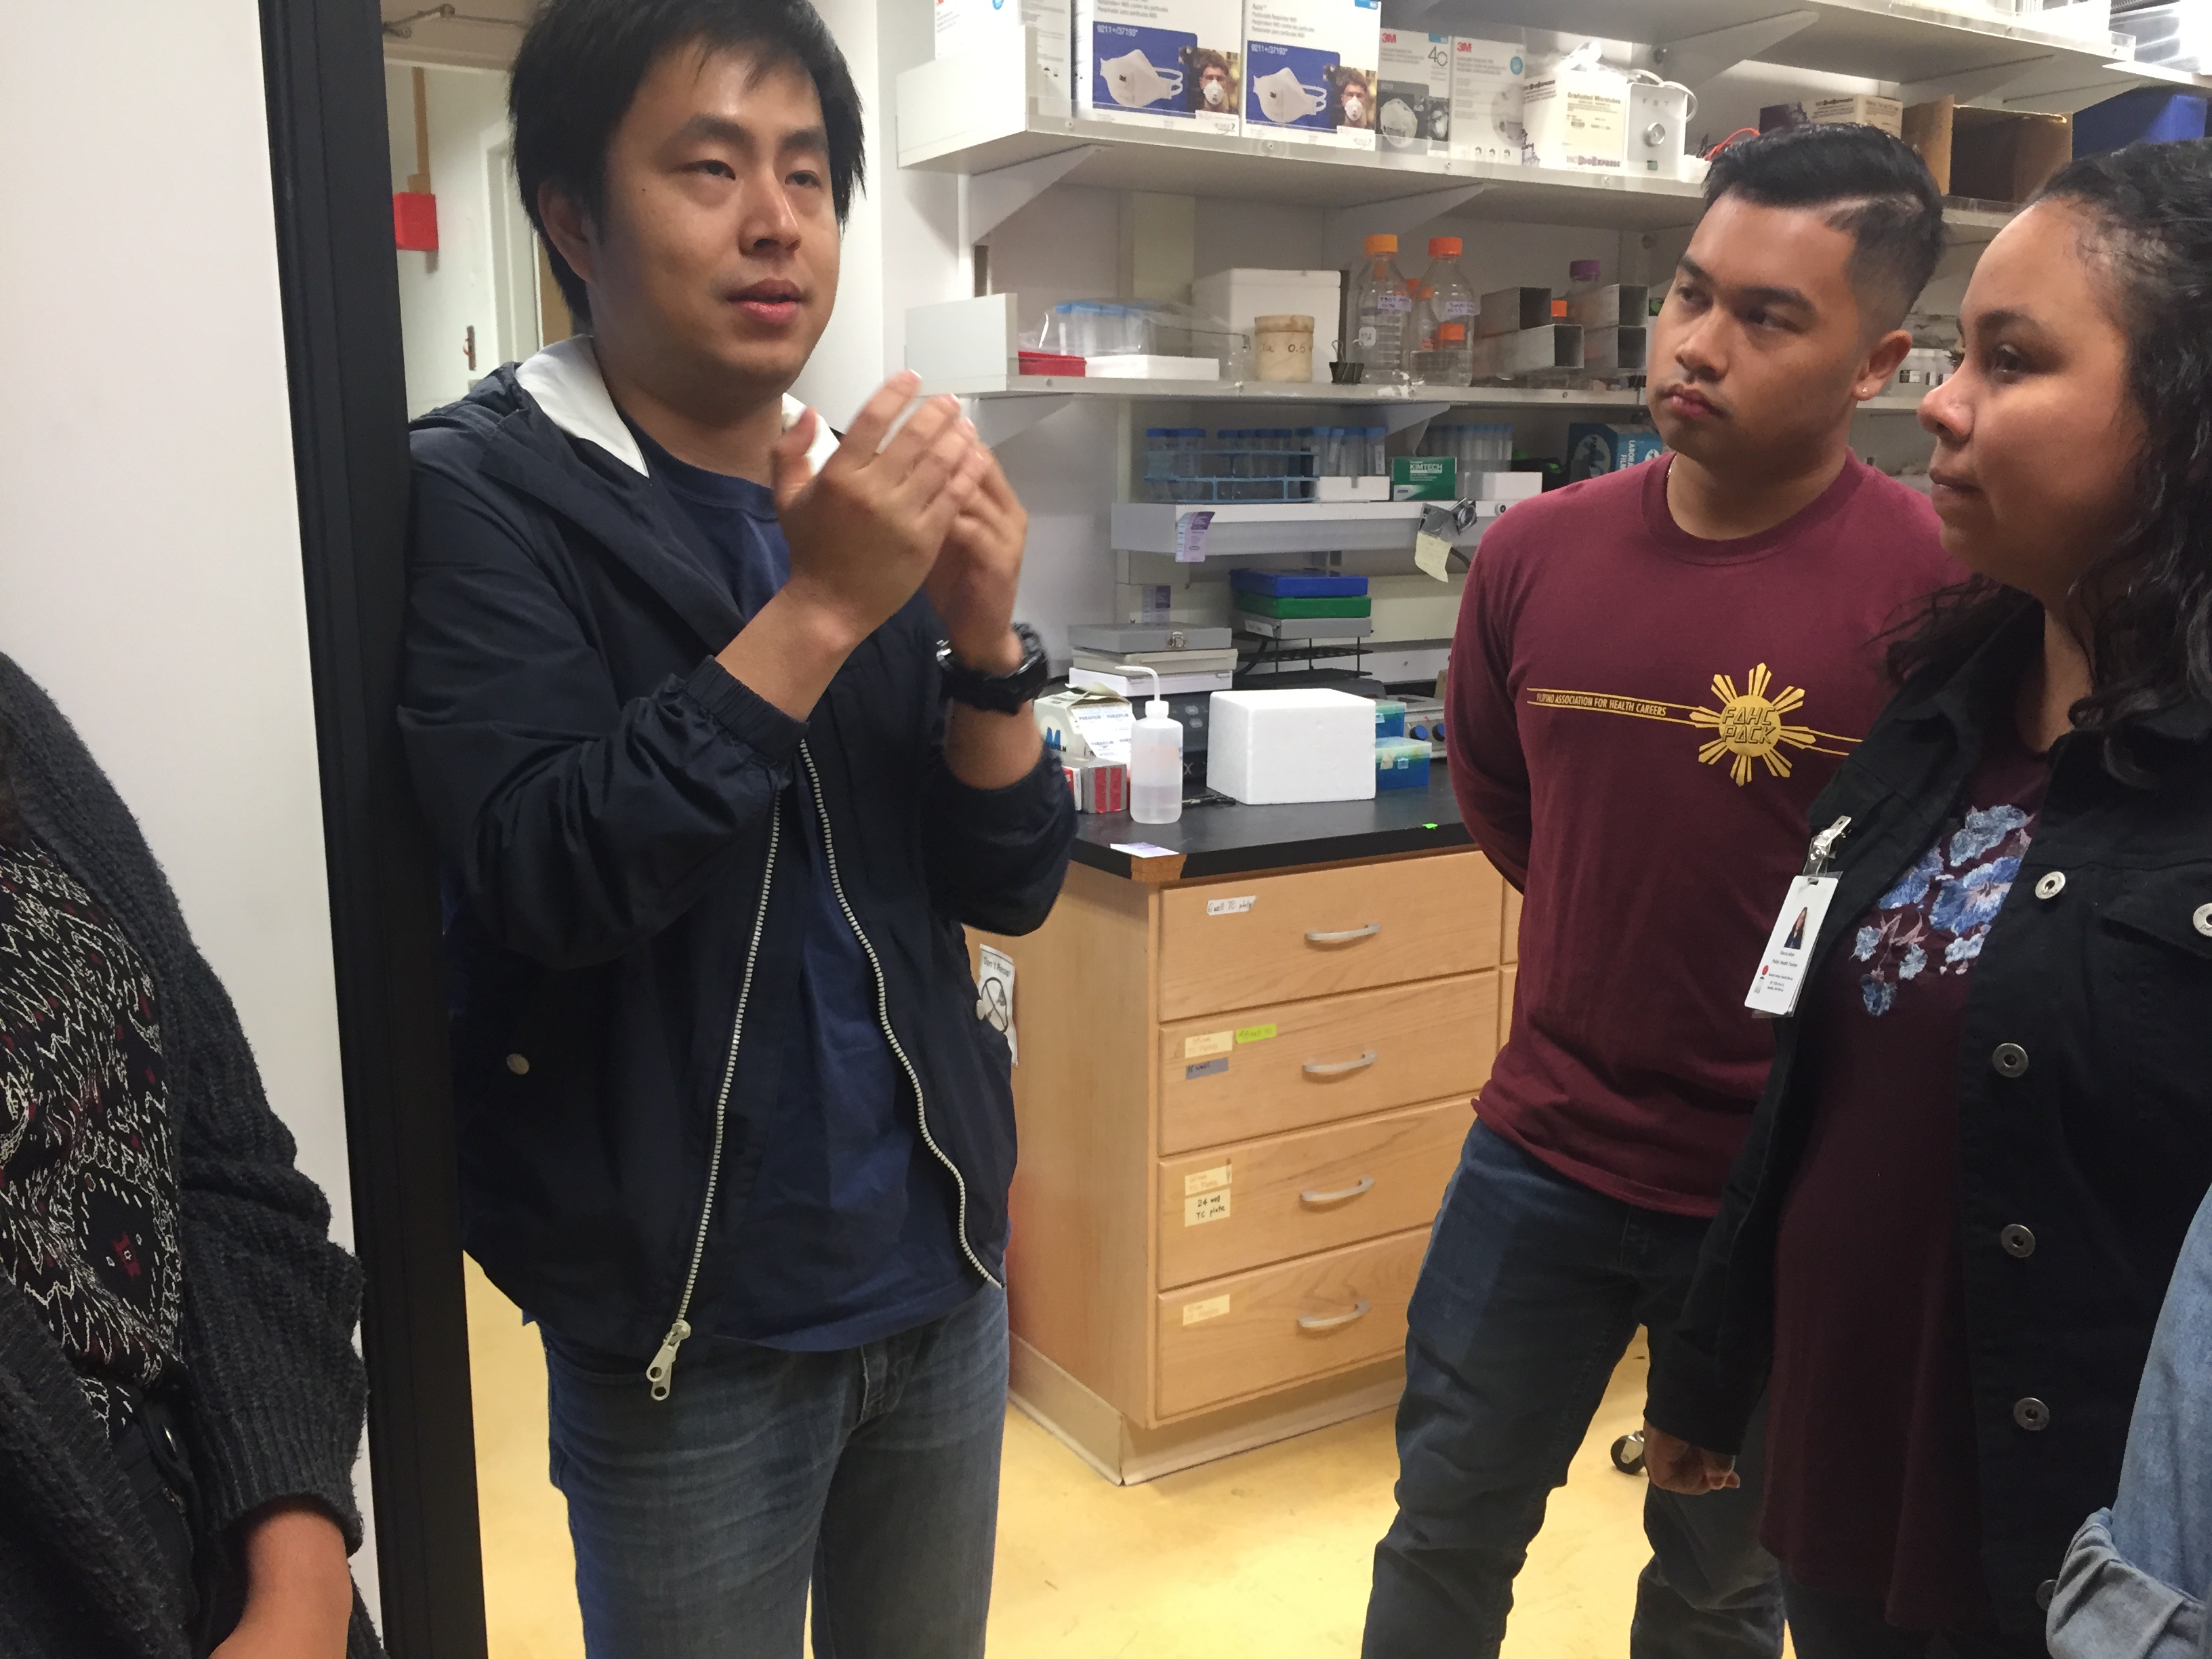 Graduate student, Hao Wang, discusses his research with visiting students in the Xia lab.